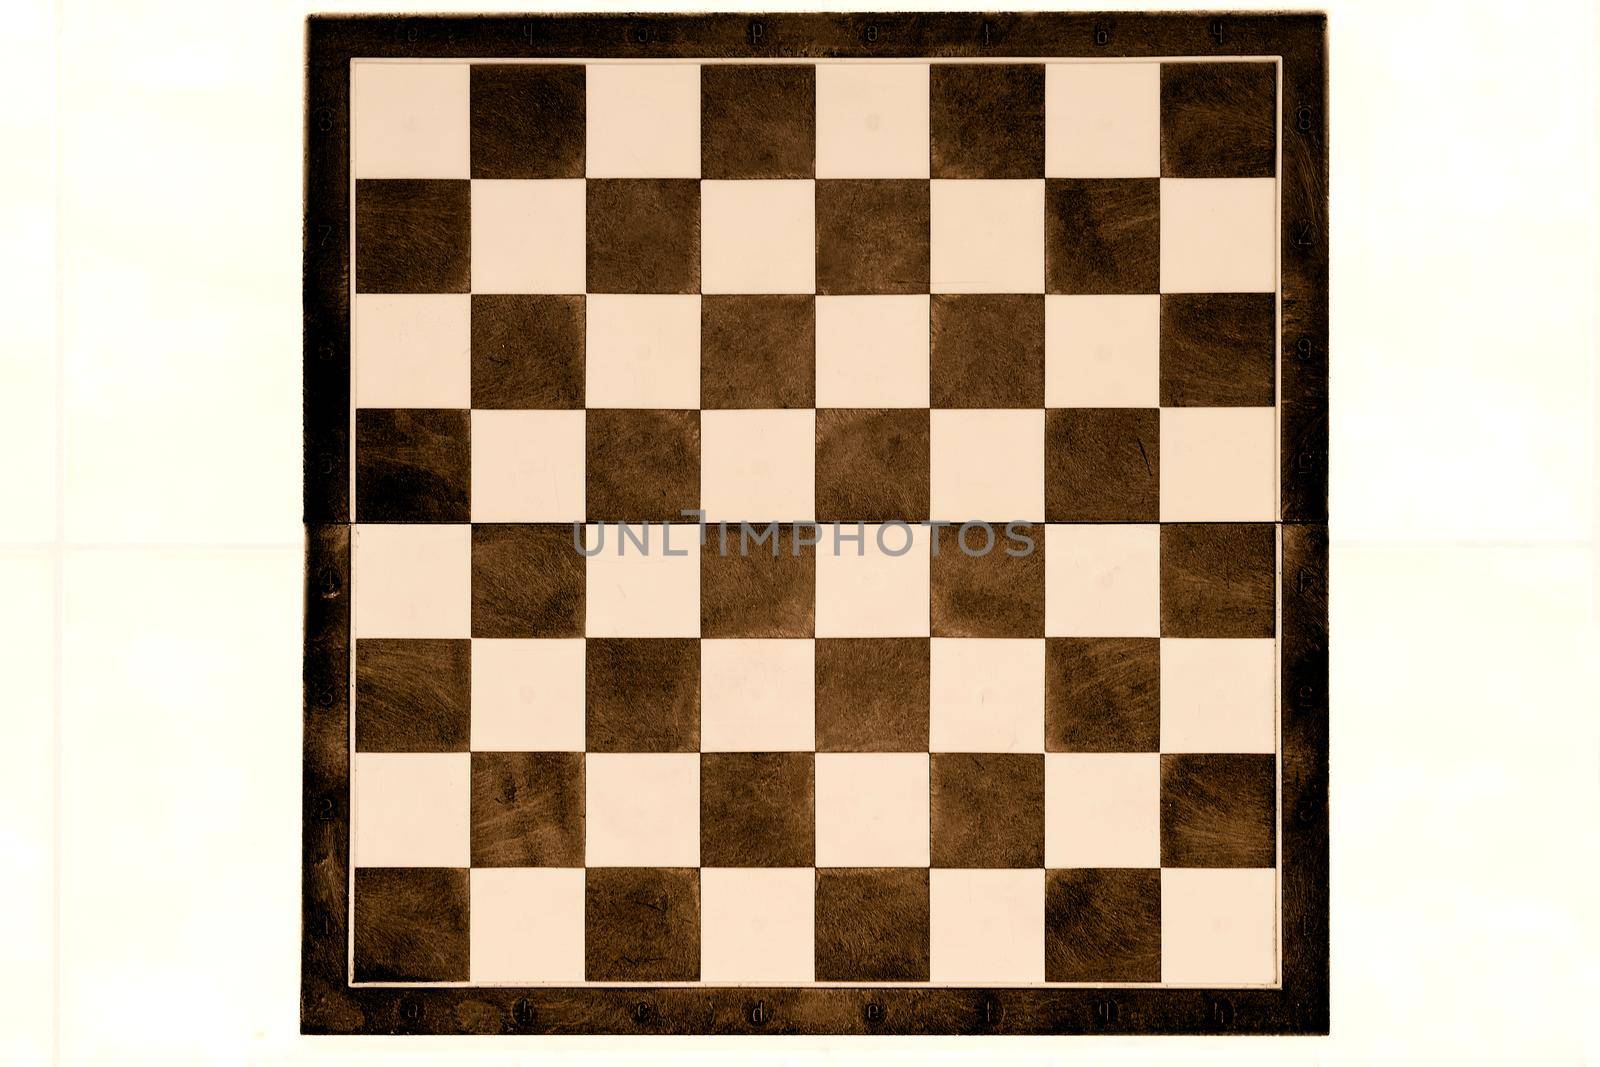 a square board divided into sixty-four alternating dark and light squares, used for playing chess or checkers.